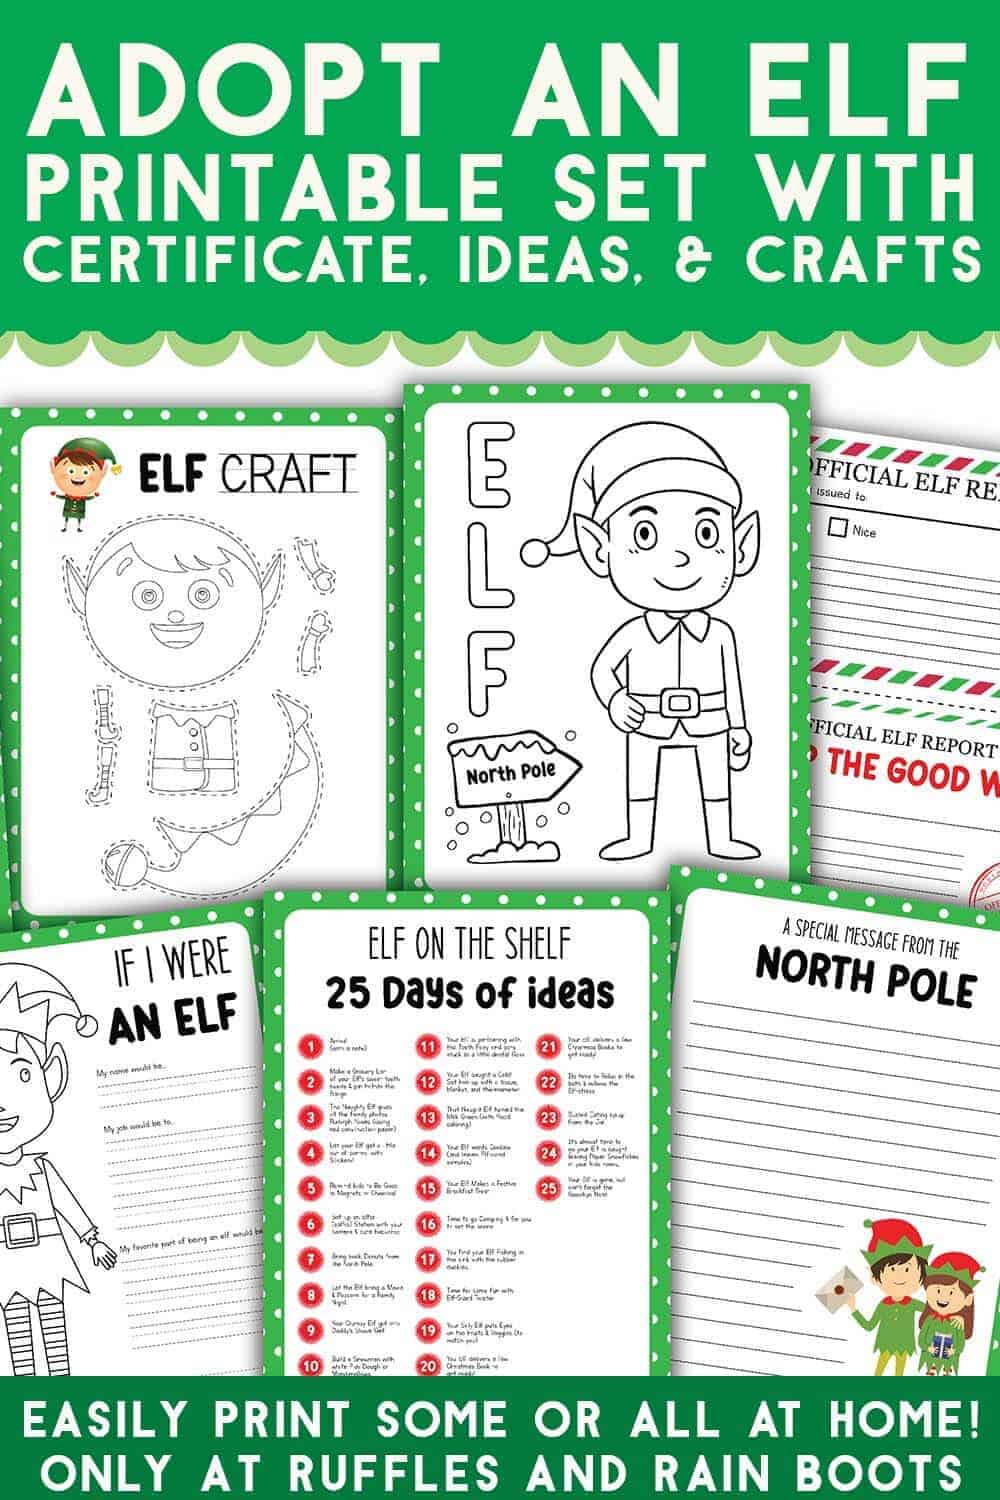 vertical image with collage of Christmas elf activities and elf on the shelf ideas with text which reads adopt an elf printable set with certificate ideas and crafts easily print some or all at home